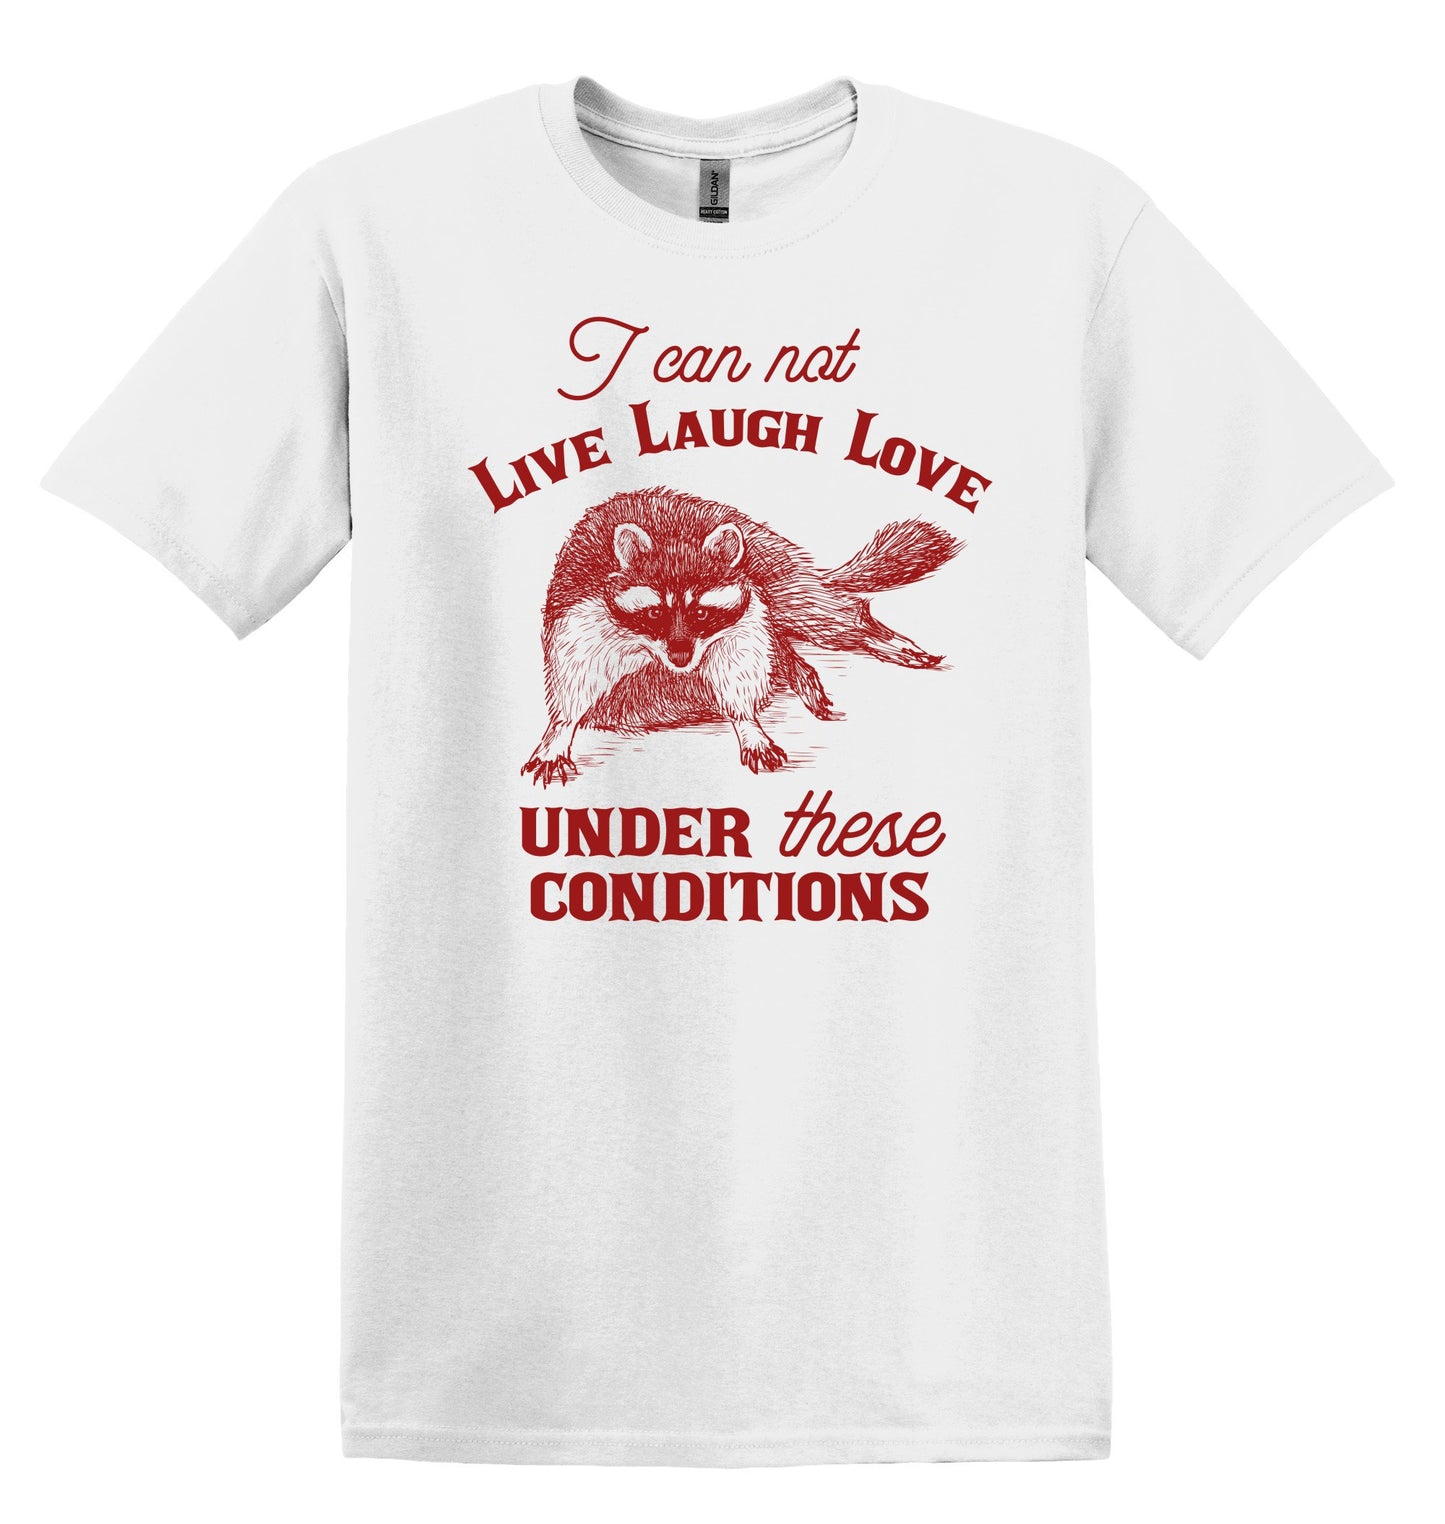 Raccoon I Can Not Live Laugh Love Under These Conditions Shirt Graphic Shirt Funny Shirts Vintage Funny T- Shirt Minimalist Shirt